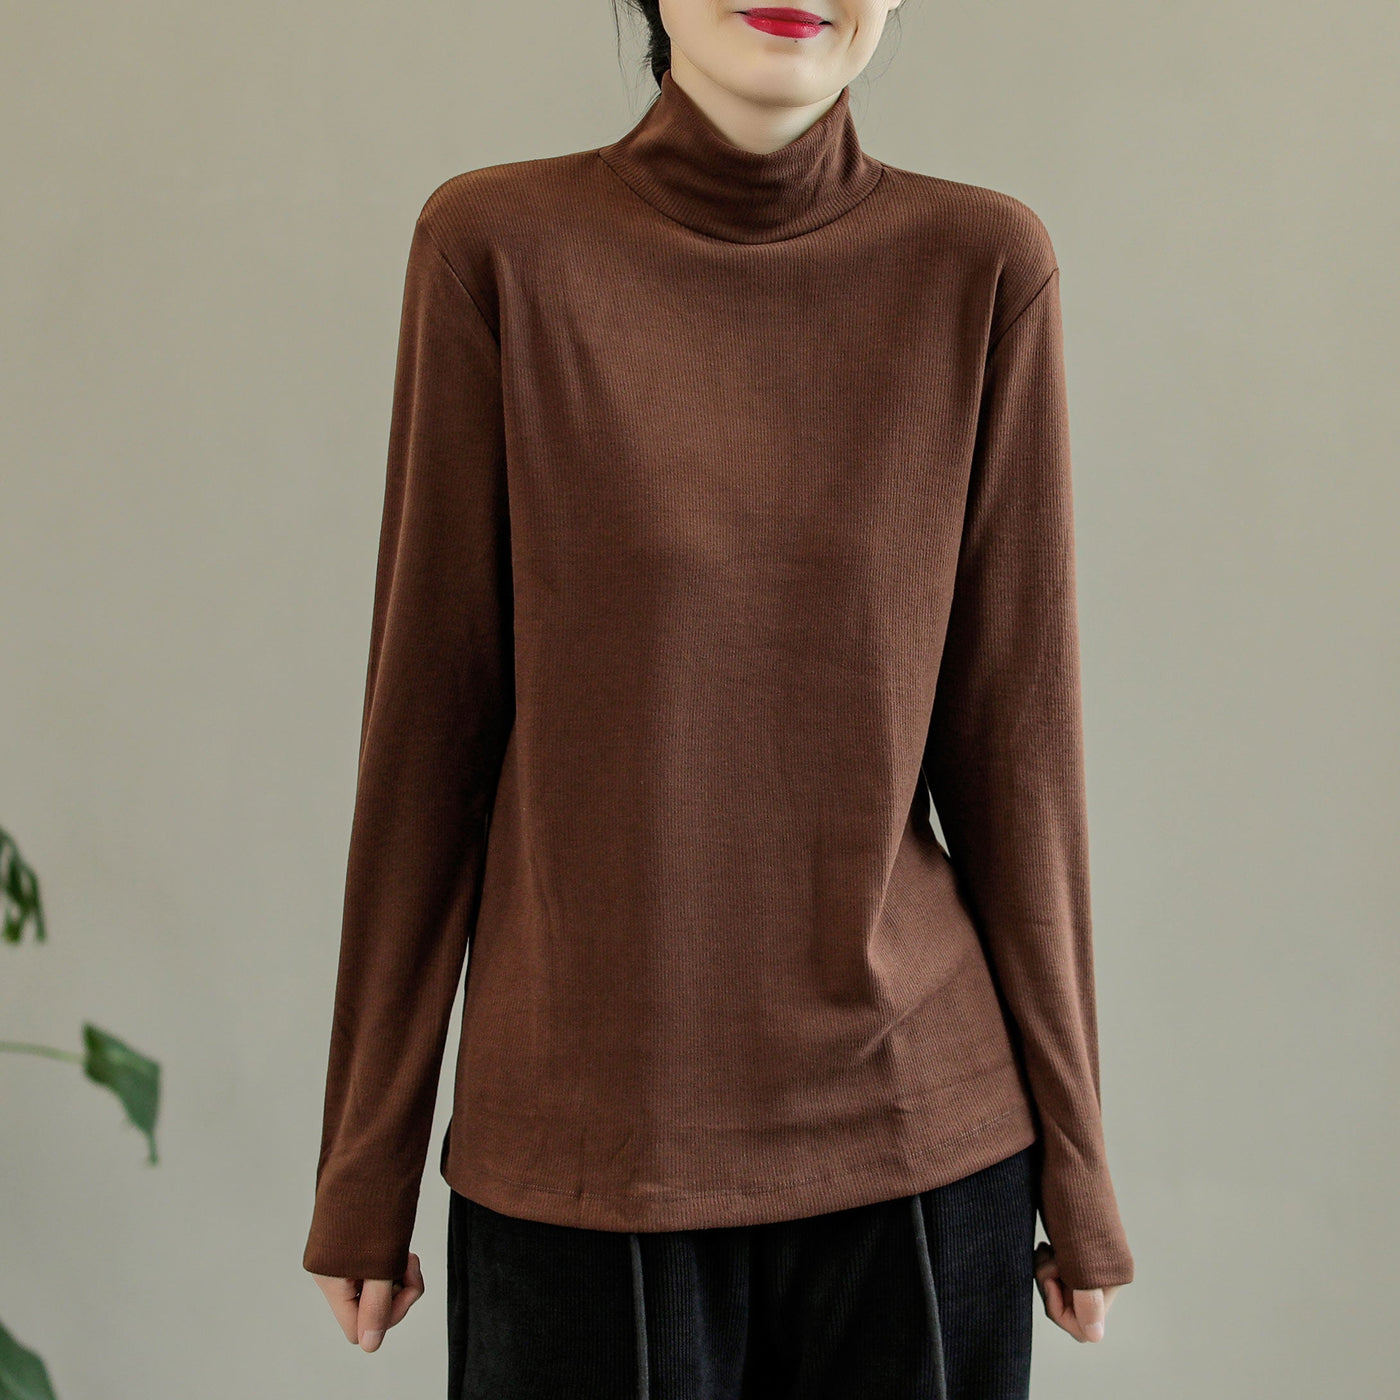 Women Autumn Winter Solid Turtleneck Cotton Sweater Oct 2022 New Arrival One Size Coffee 